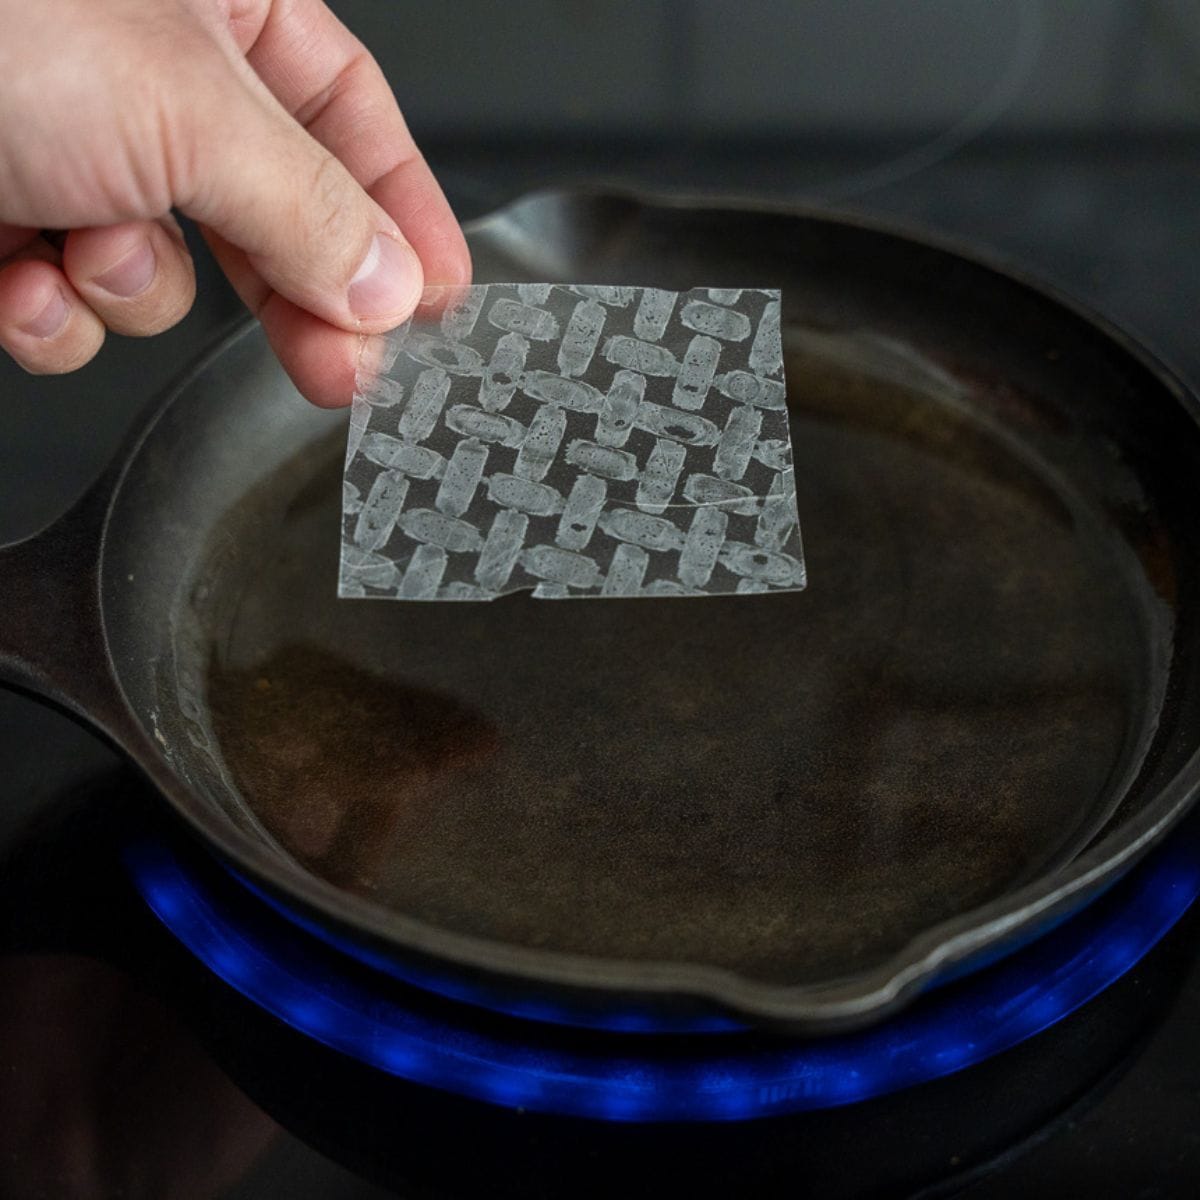 A piece of rice paper being placed into a skillet with hot oil.